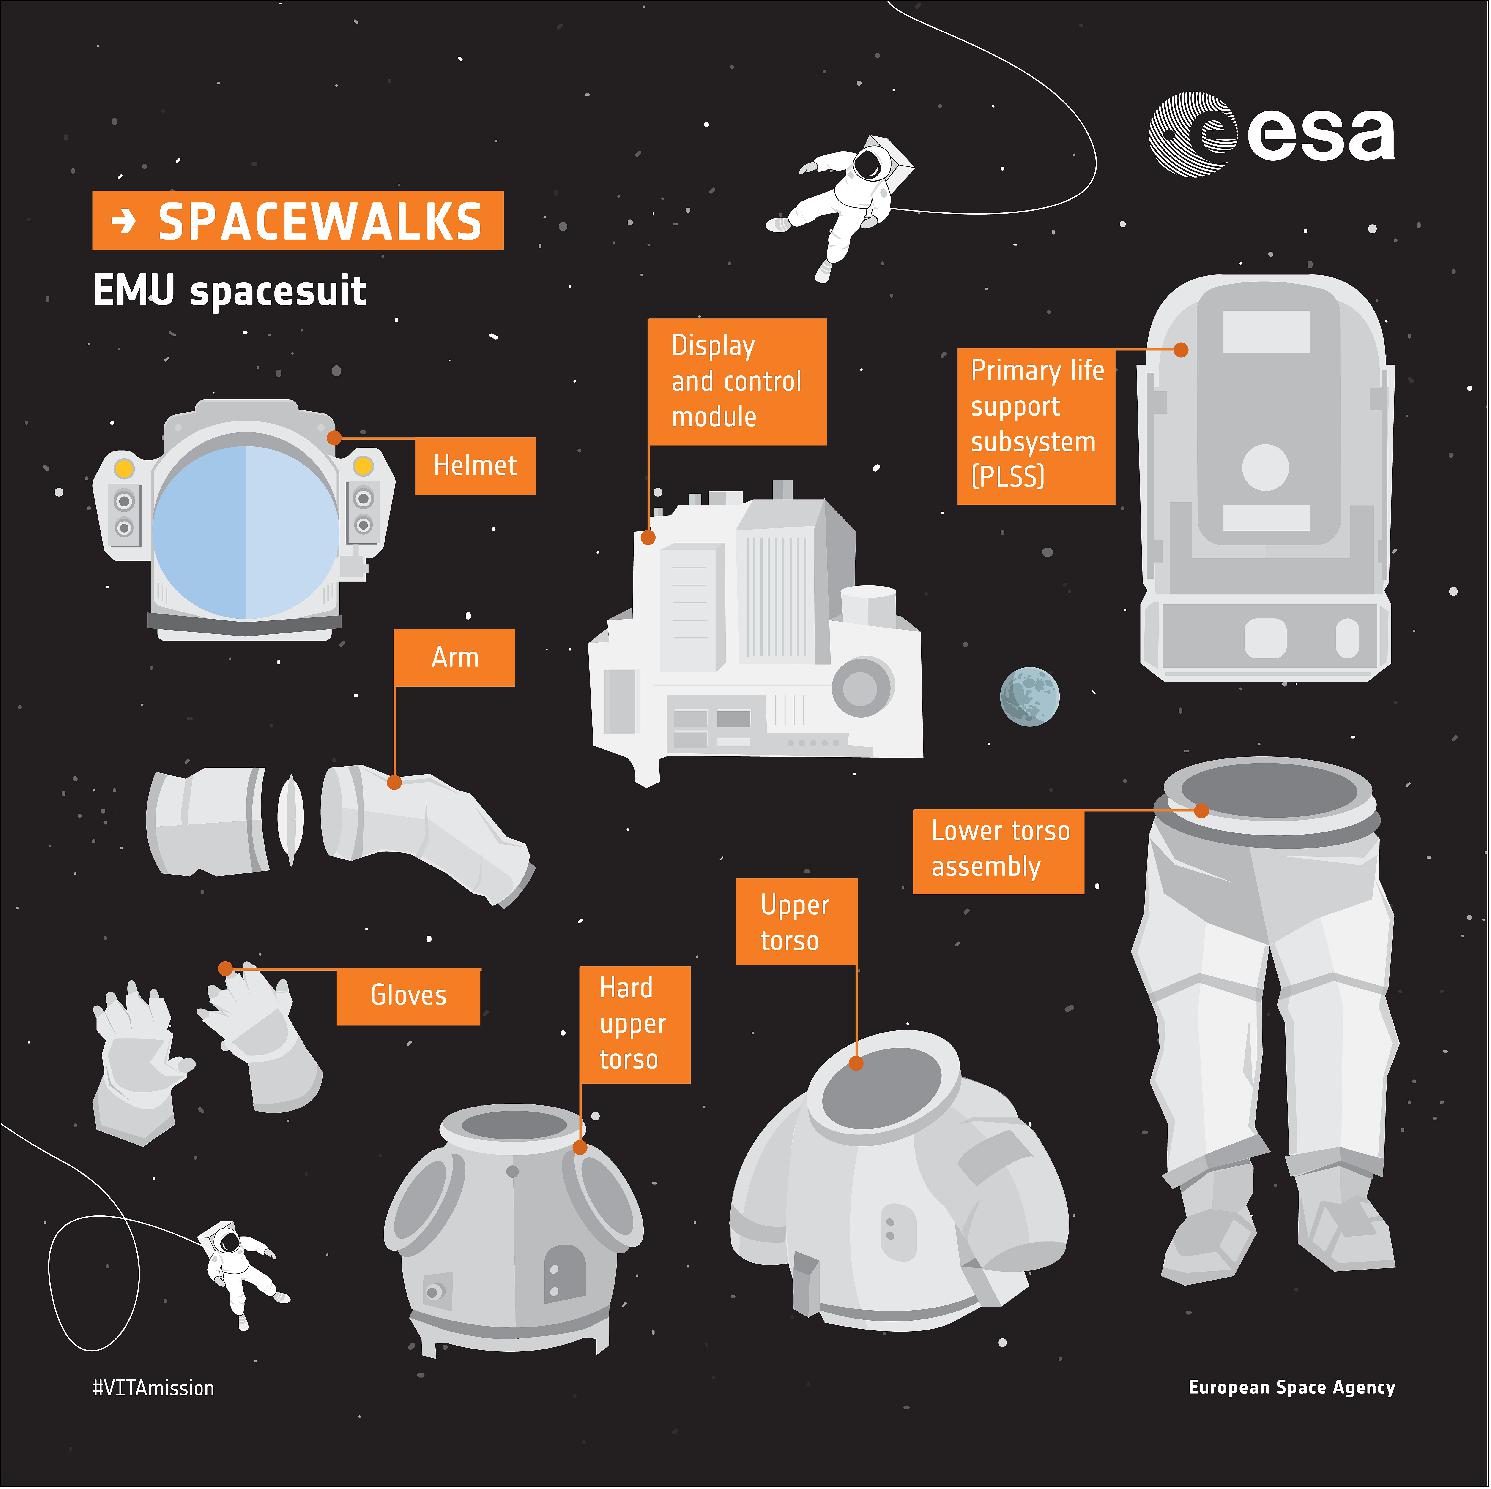 Figure 36: The EMU (Extravehicular Mobility Unit) spacesuit. Learn about the components of the EMU spacesuit (image credit: ESA)